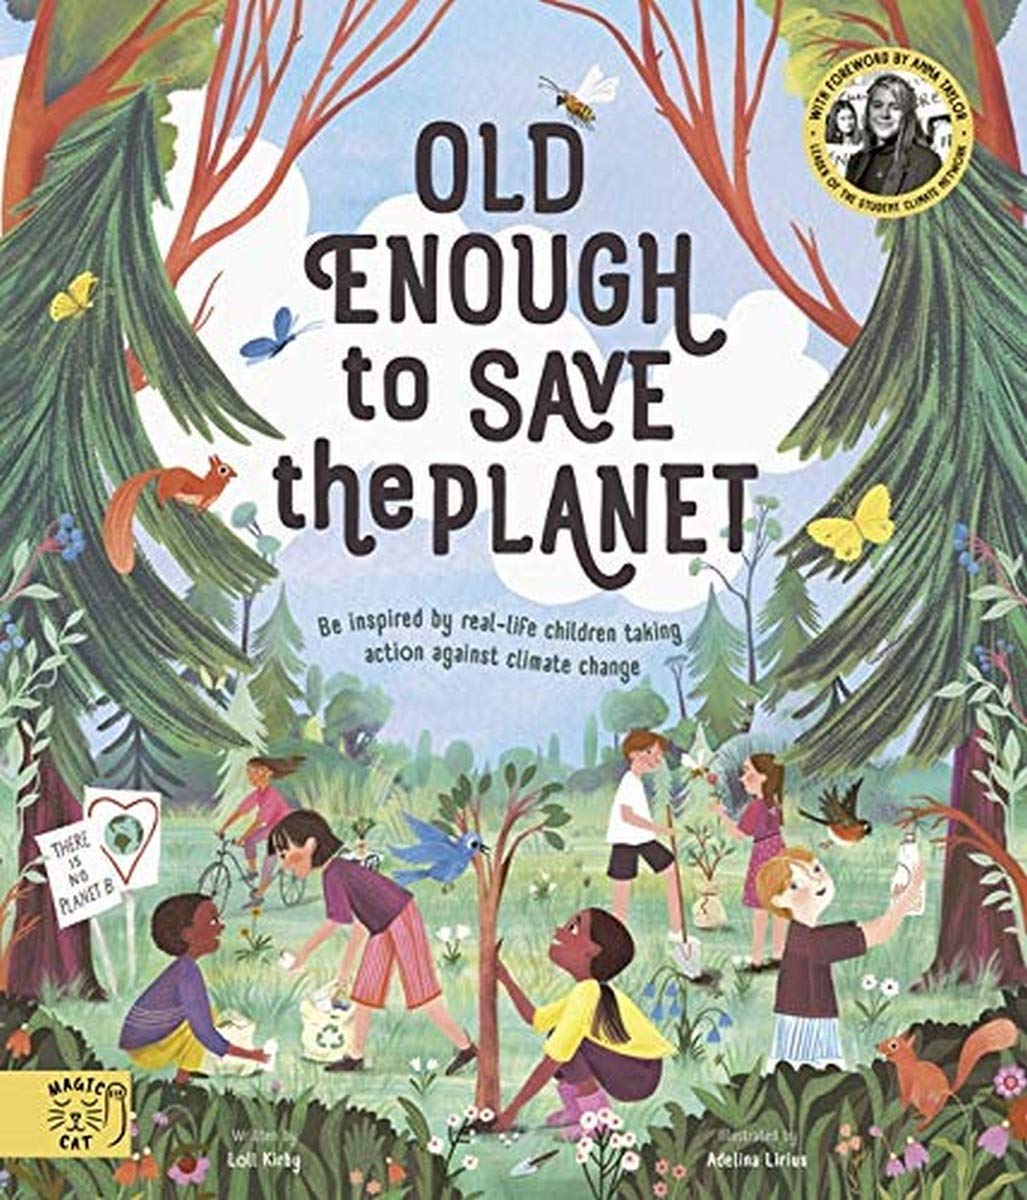 Old Enough to Save the Planet: With a foreword from the leaders of the School Strike for Climate Change